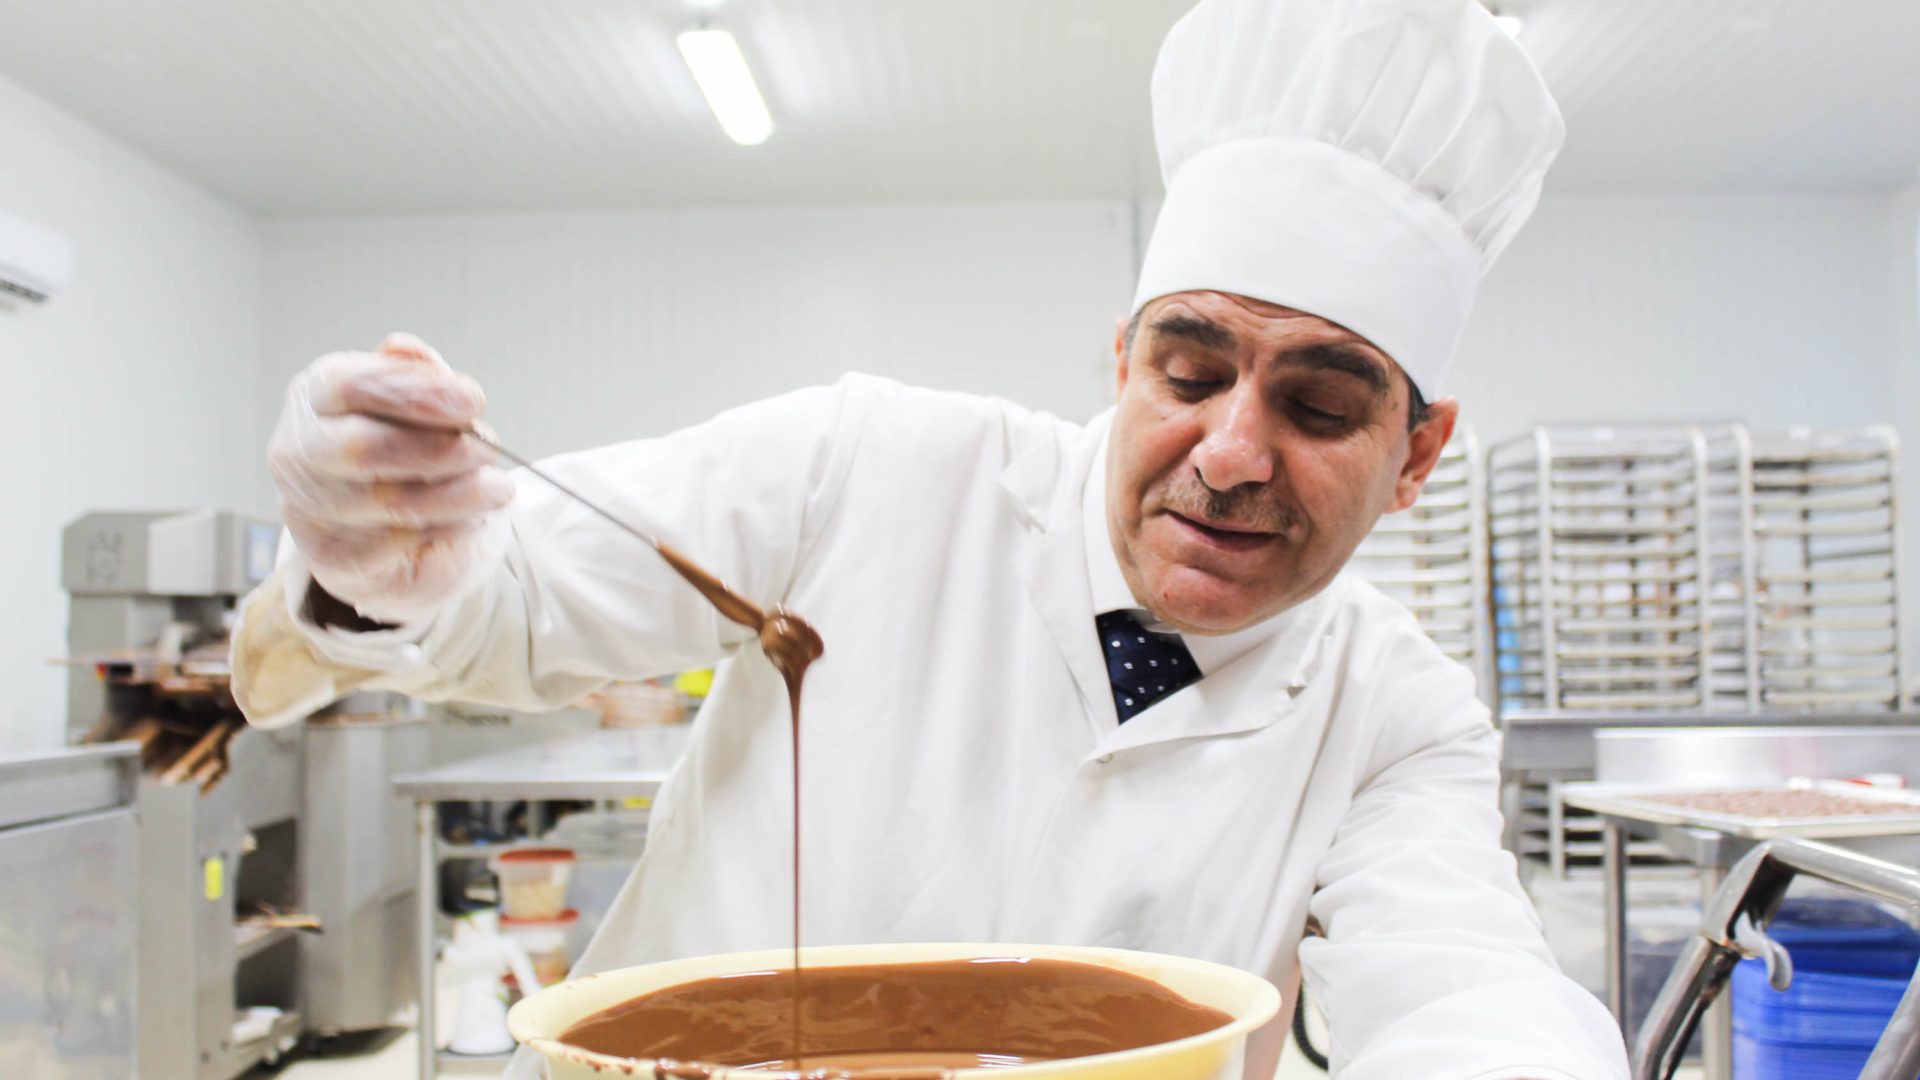 Isam Hadhad lifts up a spoon of chocolate from a big bowl. He is wearing white chef clothing.